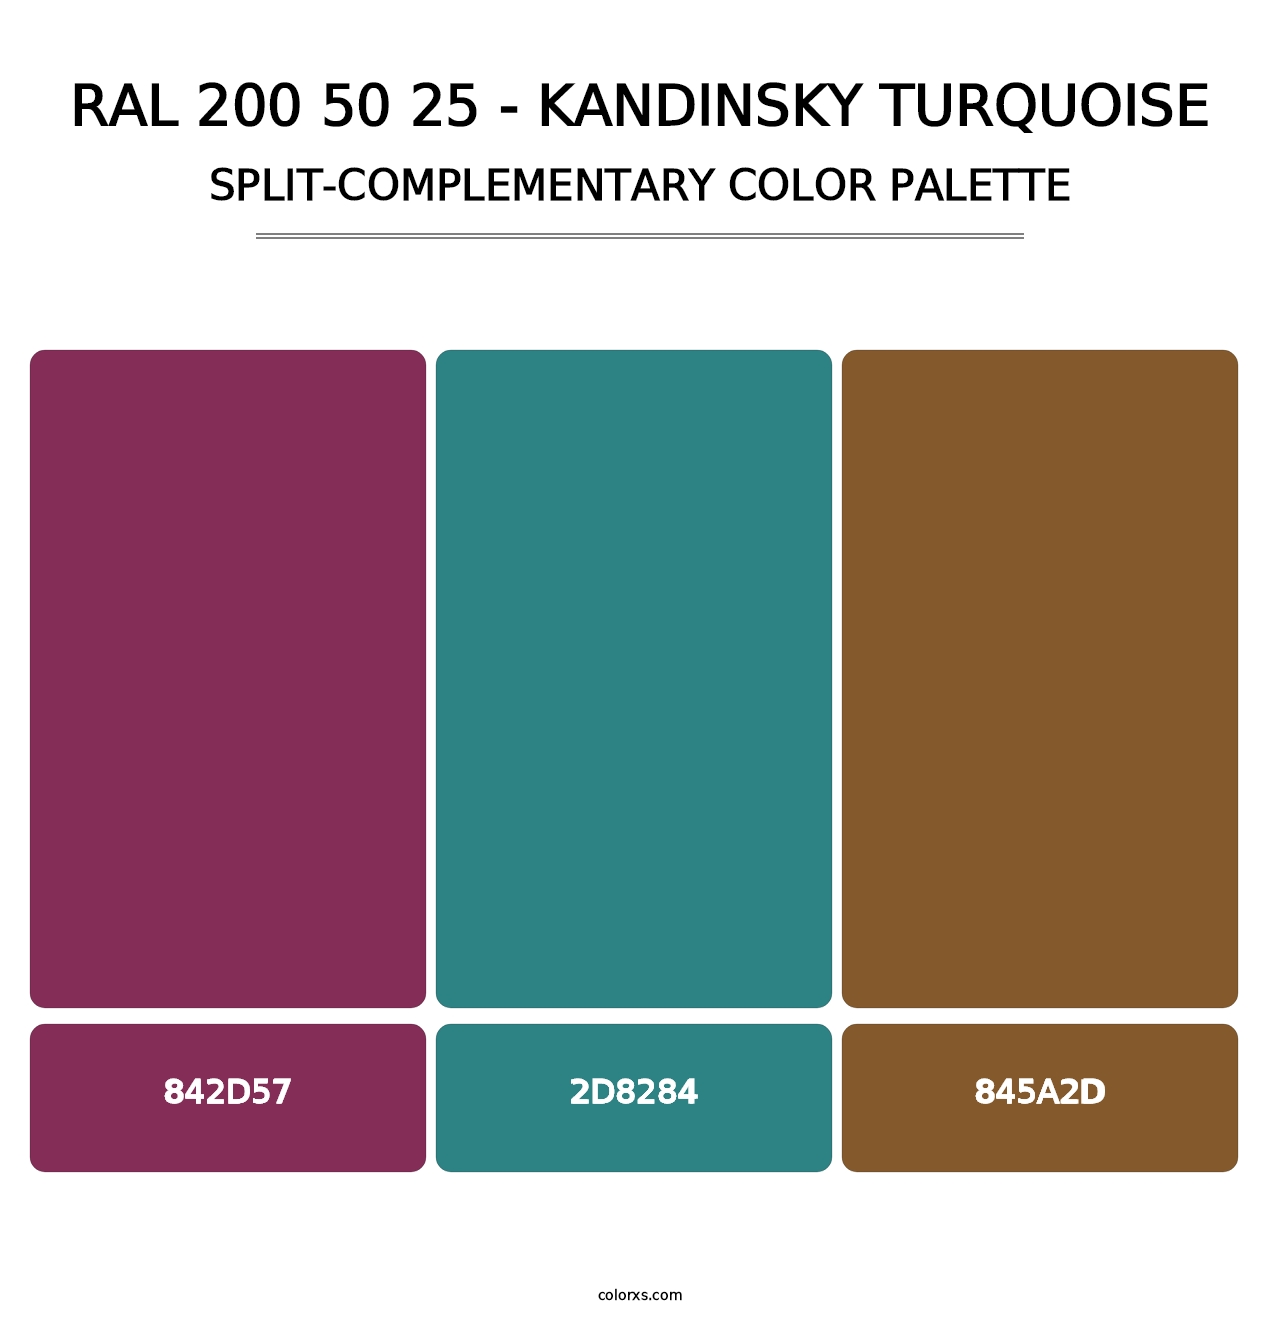 RAL 200 50 25 - Kandinsky Turquoise - Split-Complementary Color Palette